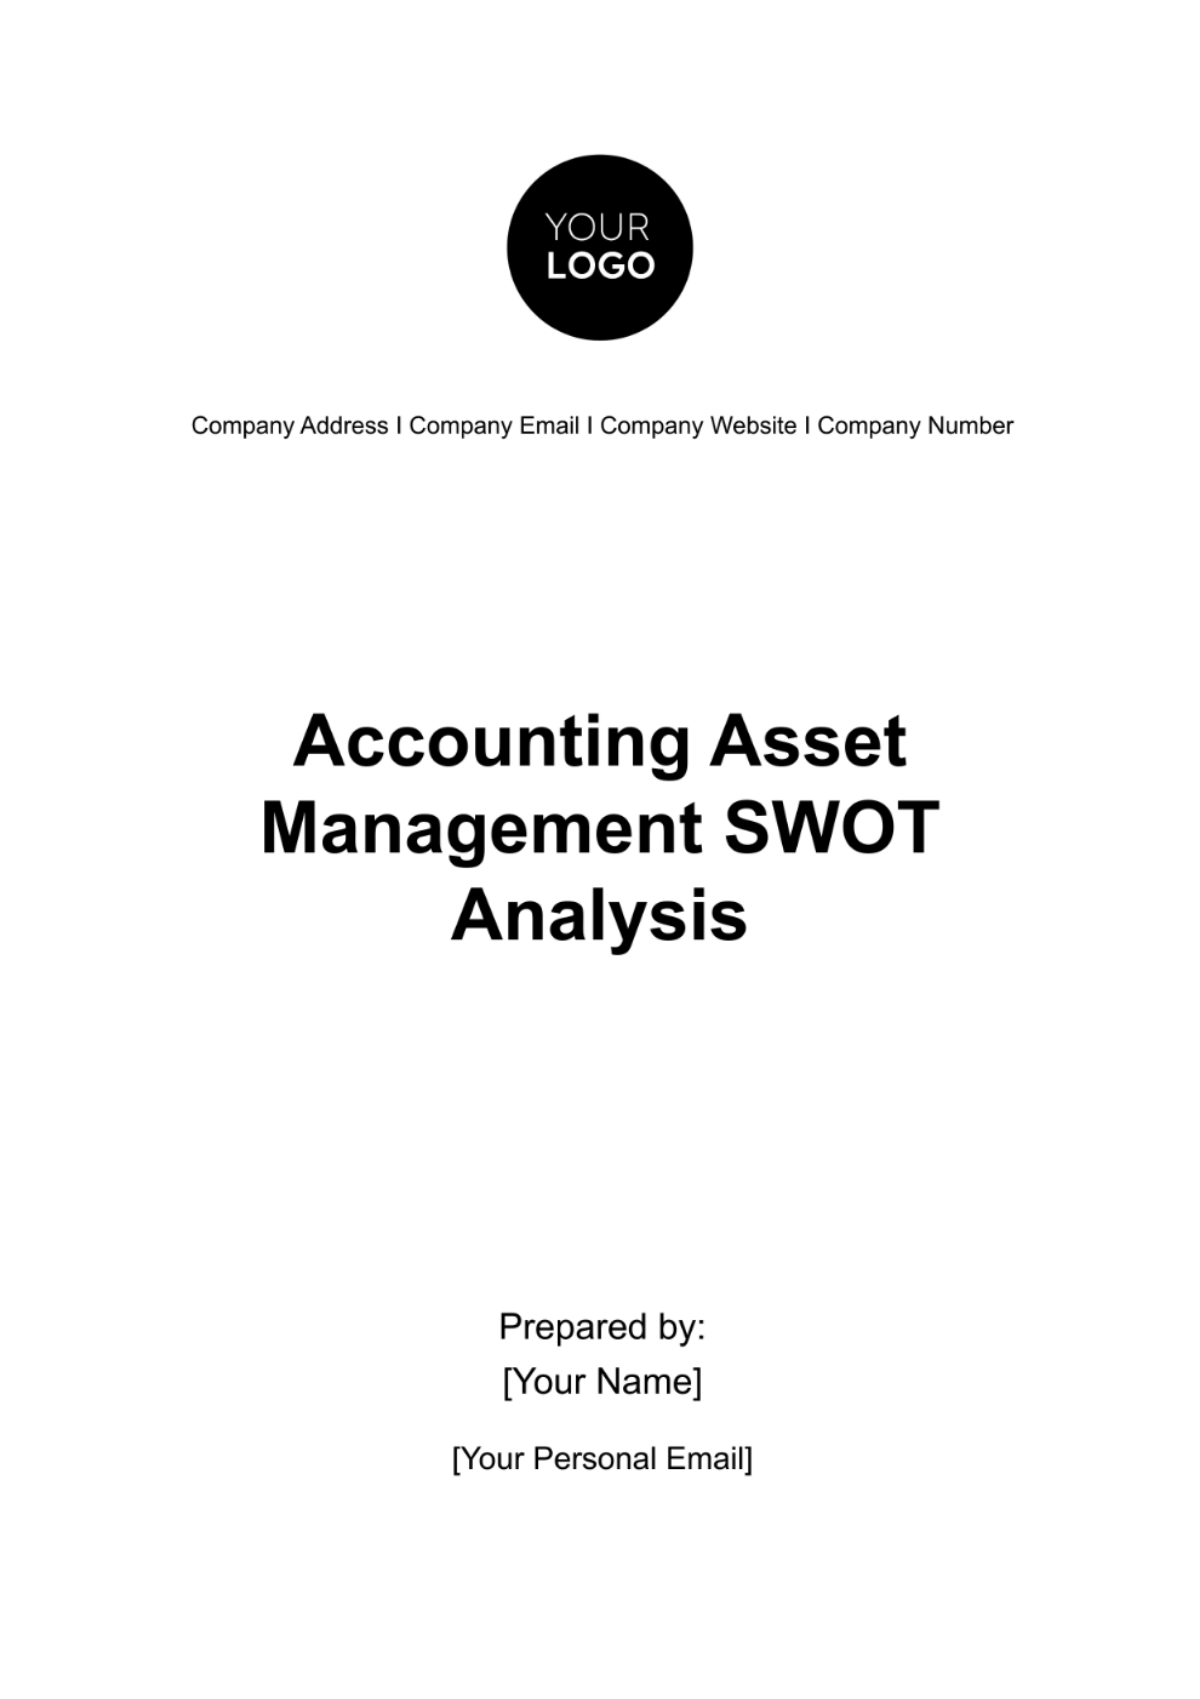 Free Accounting Asset Management SWOT Analysis Template